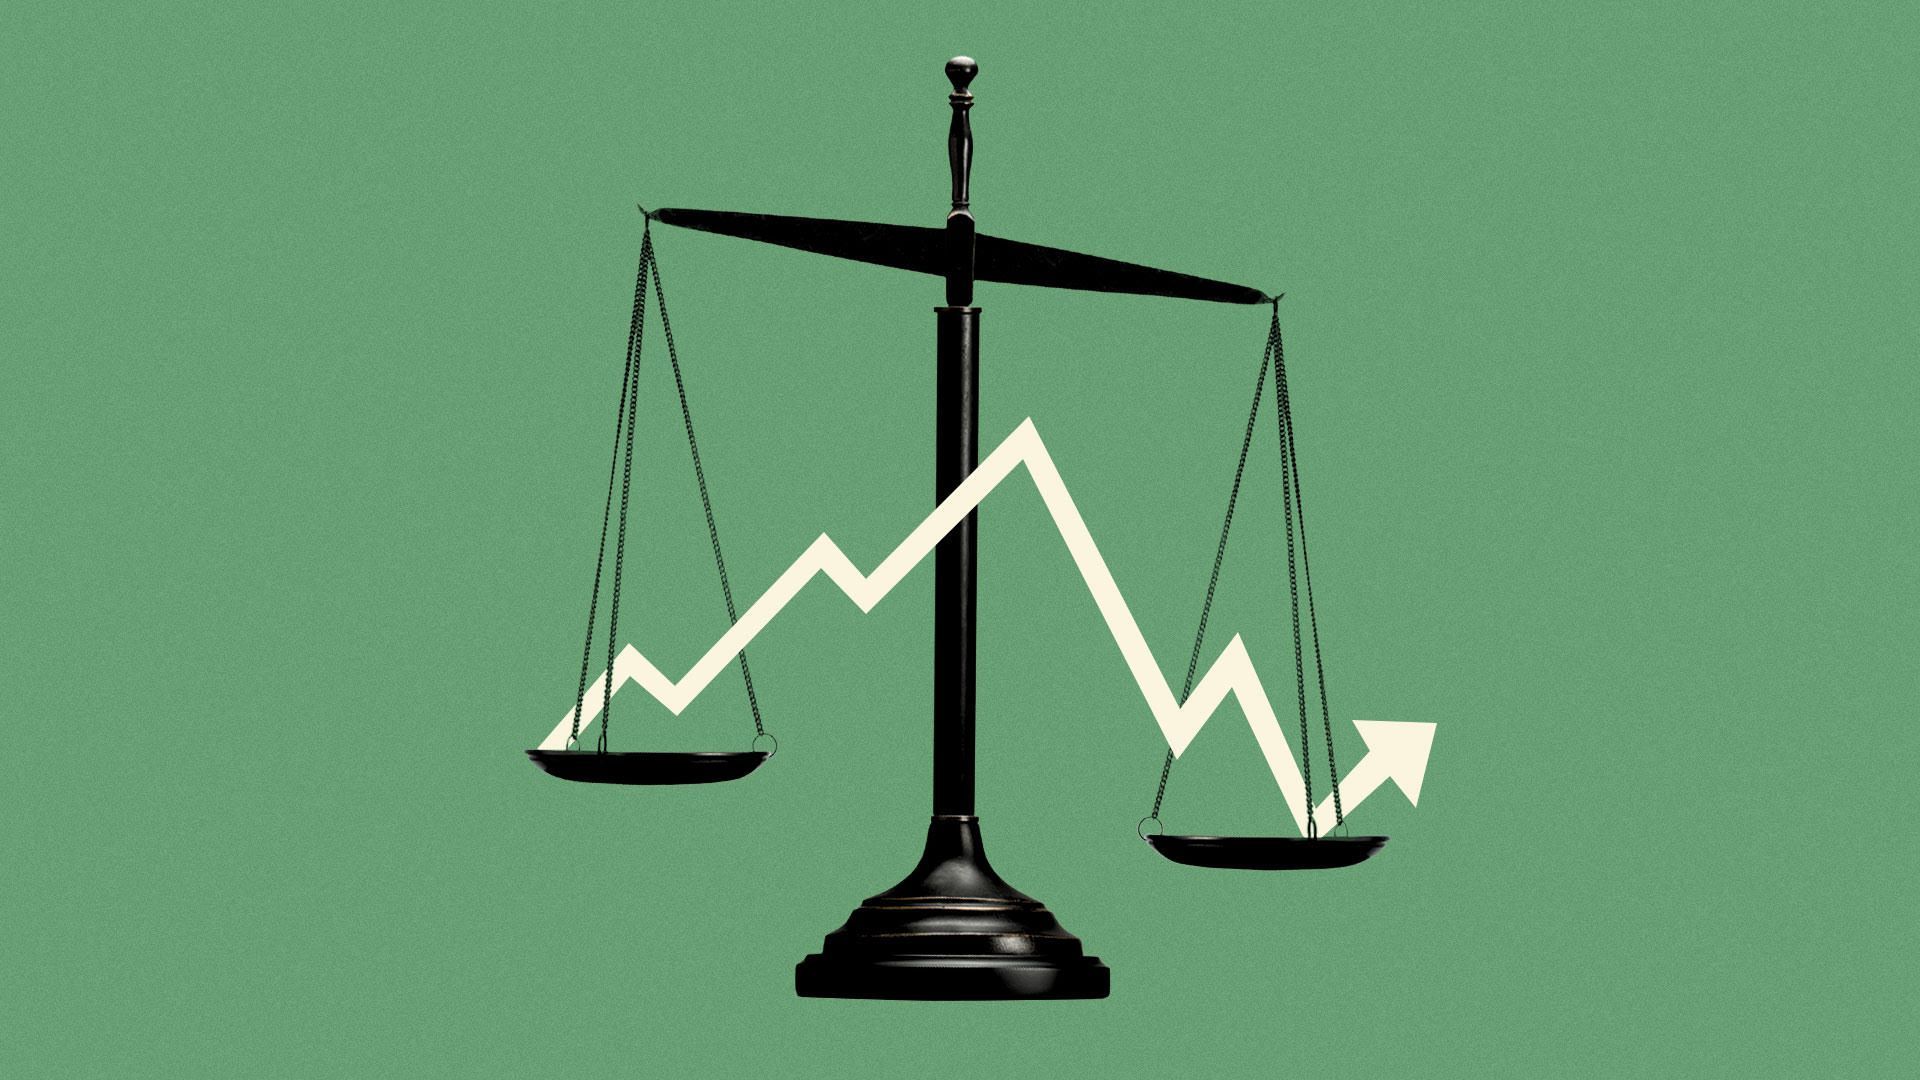 Illustration of scales of justice holding a line graph.